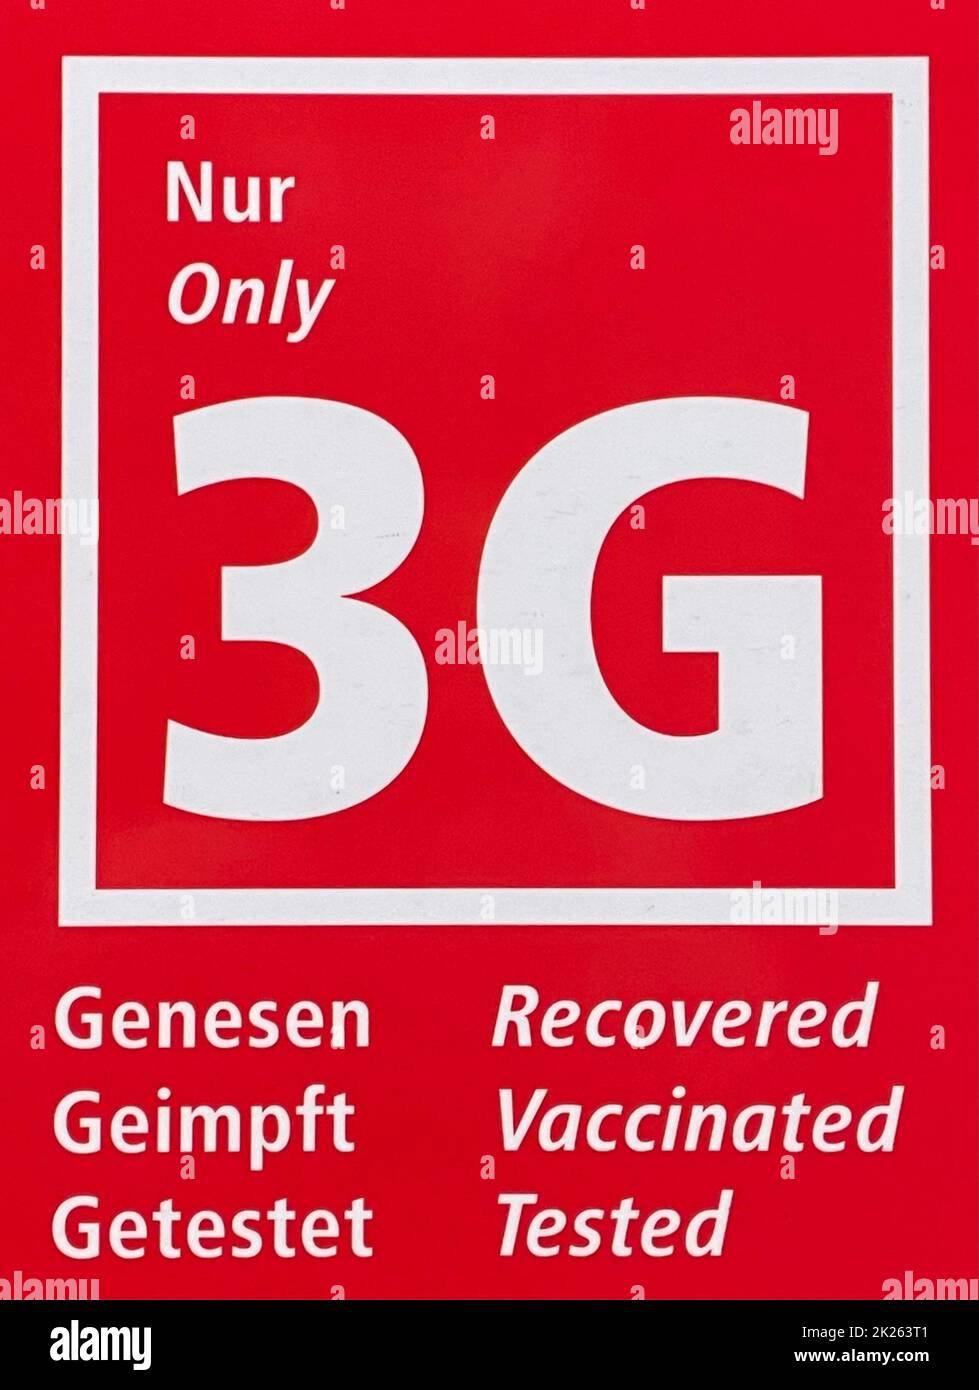 Guide marker for 3G regulation due coronavirus pandemic with advice that only recovered, vaccinated and tested people are allowed - public space in Germa and Englisch Language - only 3G Stock Photo